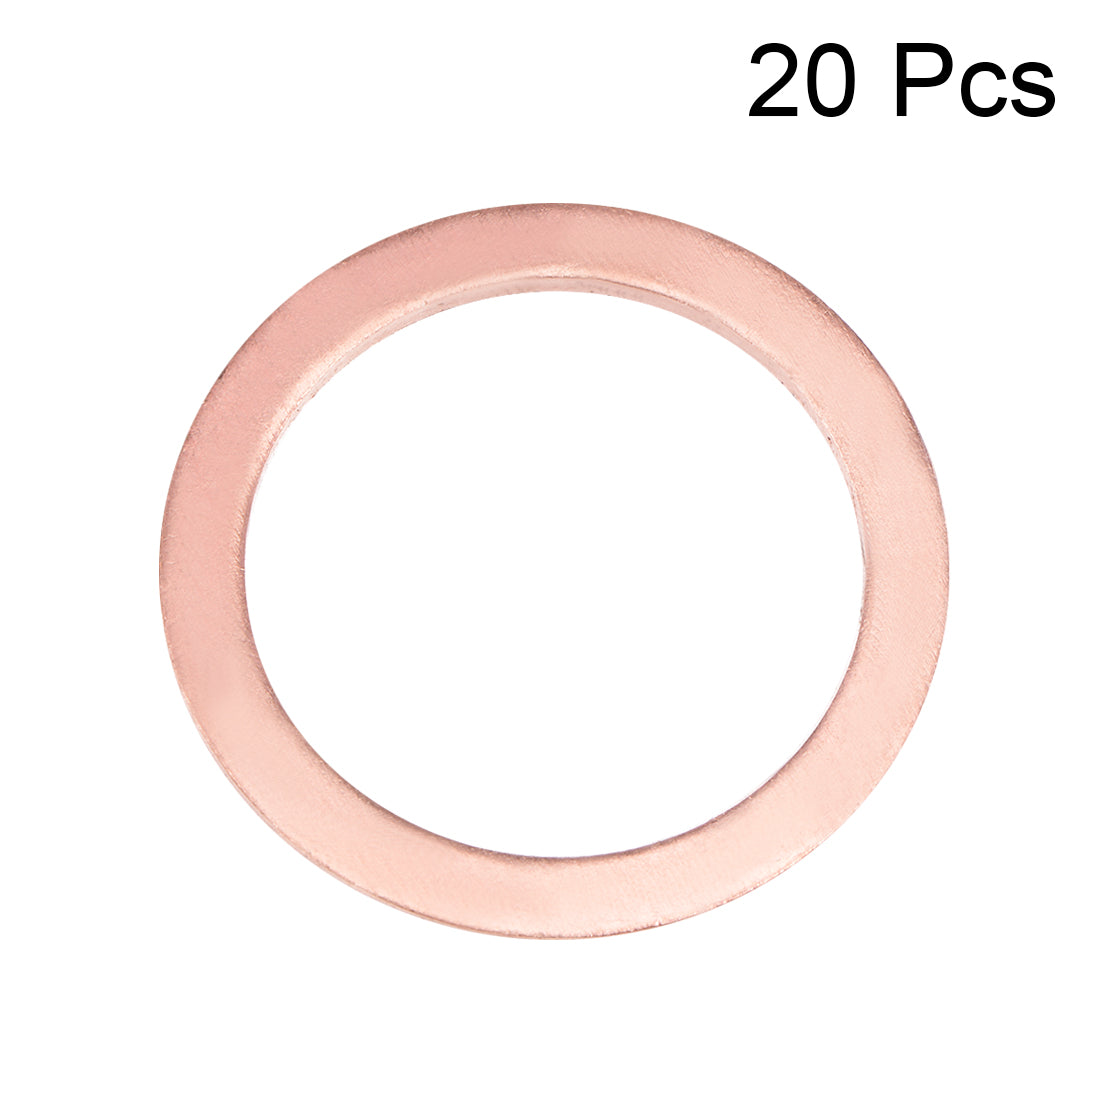 uxcell Uxcell 20Pcs 20mm x 26mm x 1.5mm Copper Flat Washer for Screw Bolt